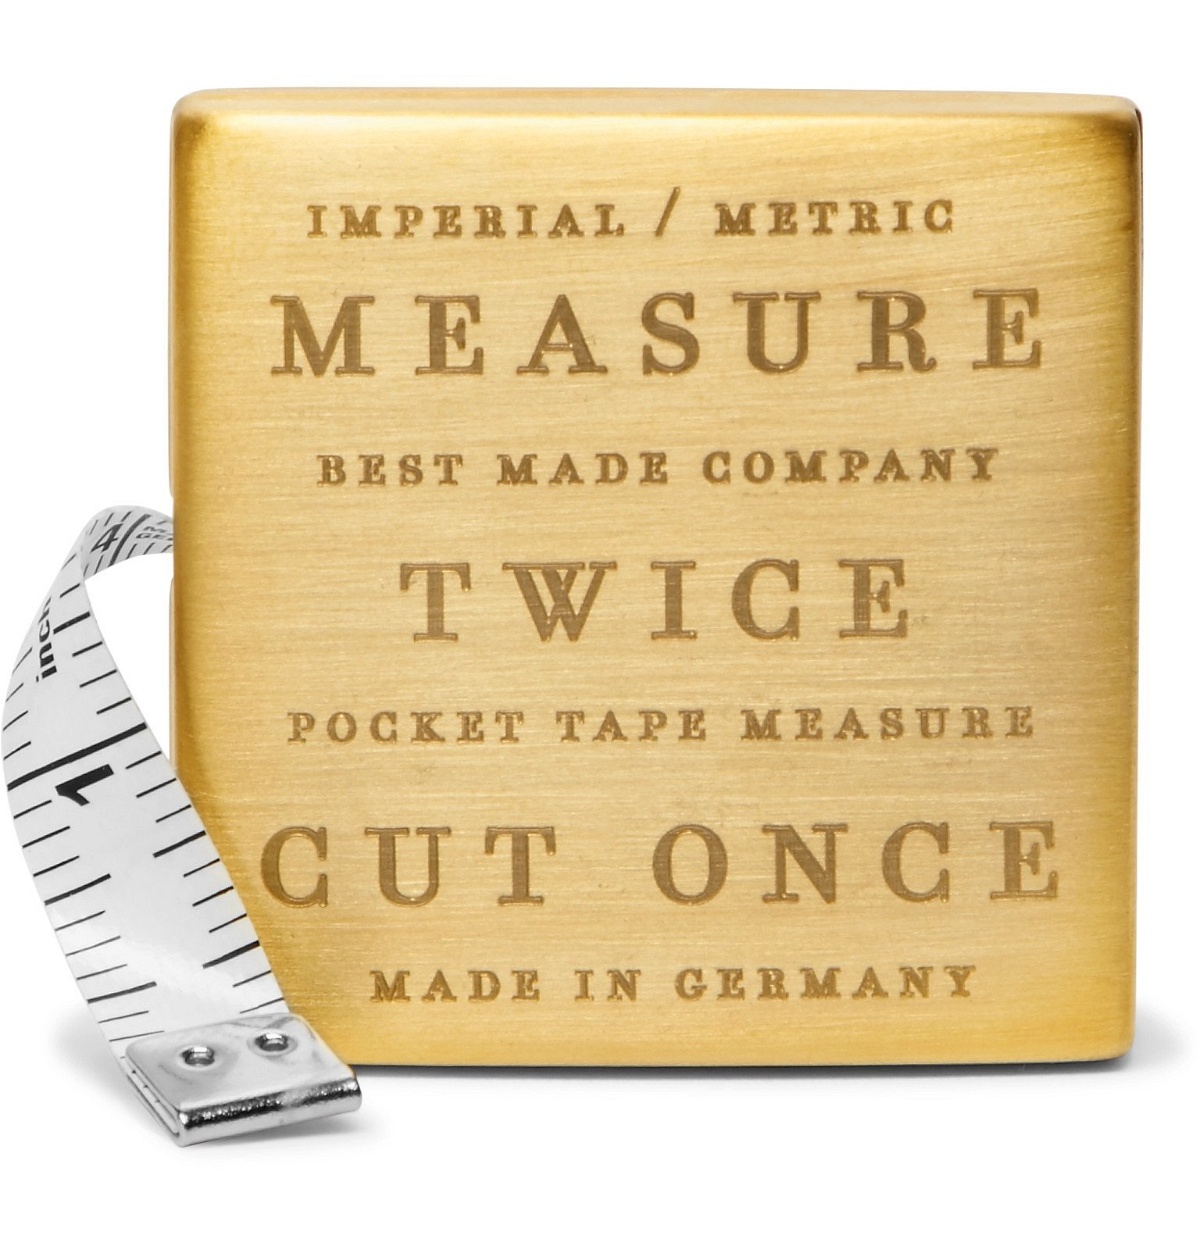 Photo: Best Made Company - Engraved Brass Measuring Tape - Metallic